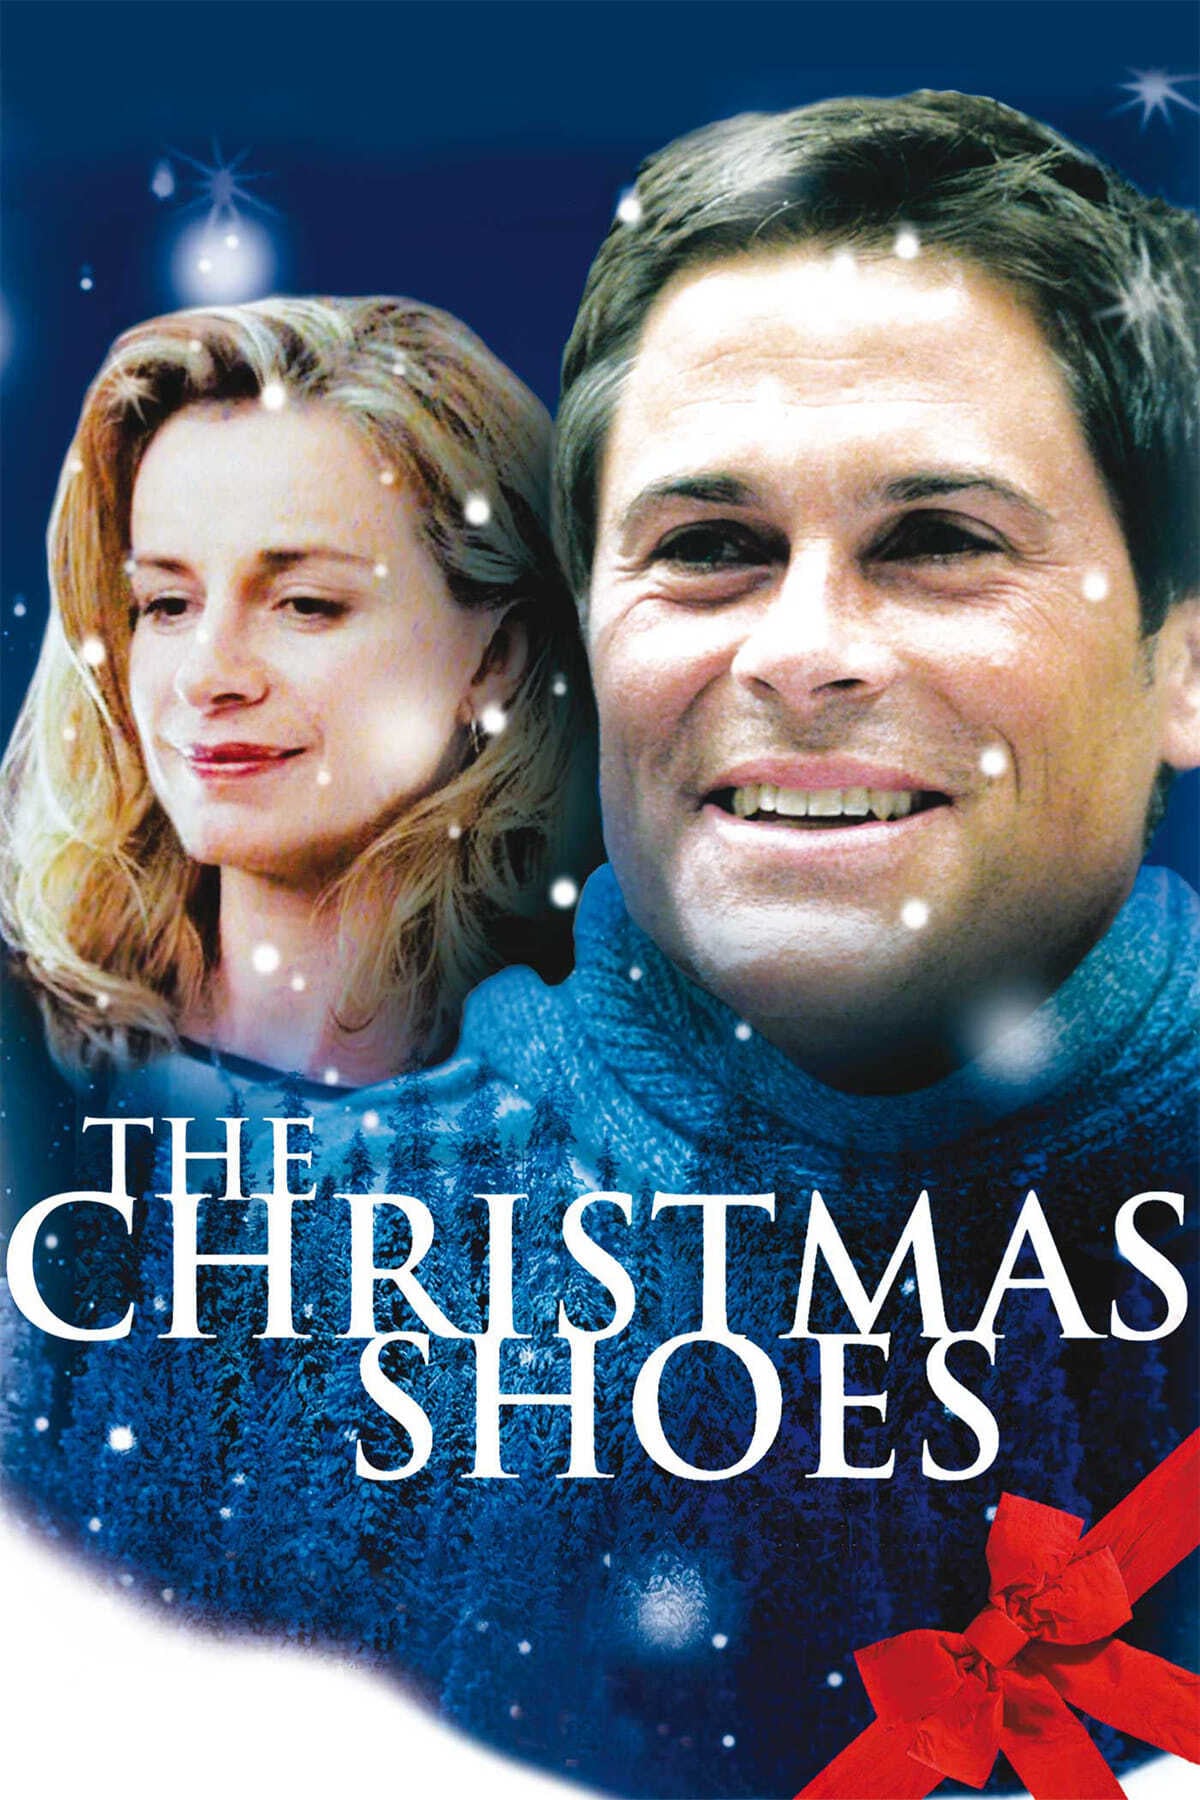 The Christmas Shoes (2002)